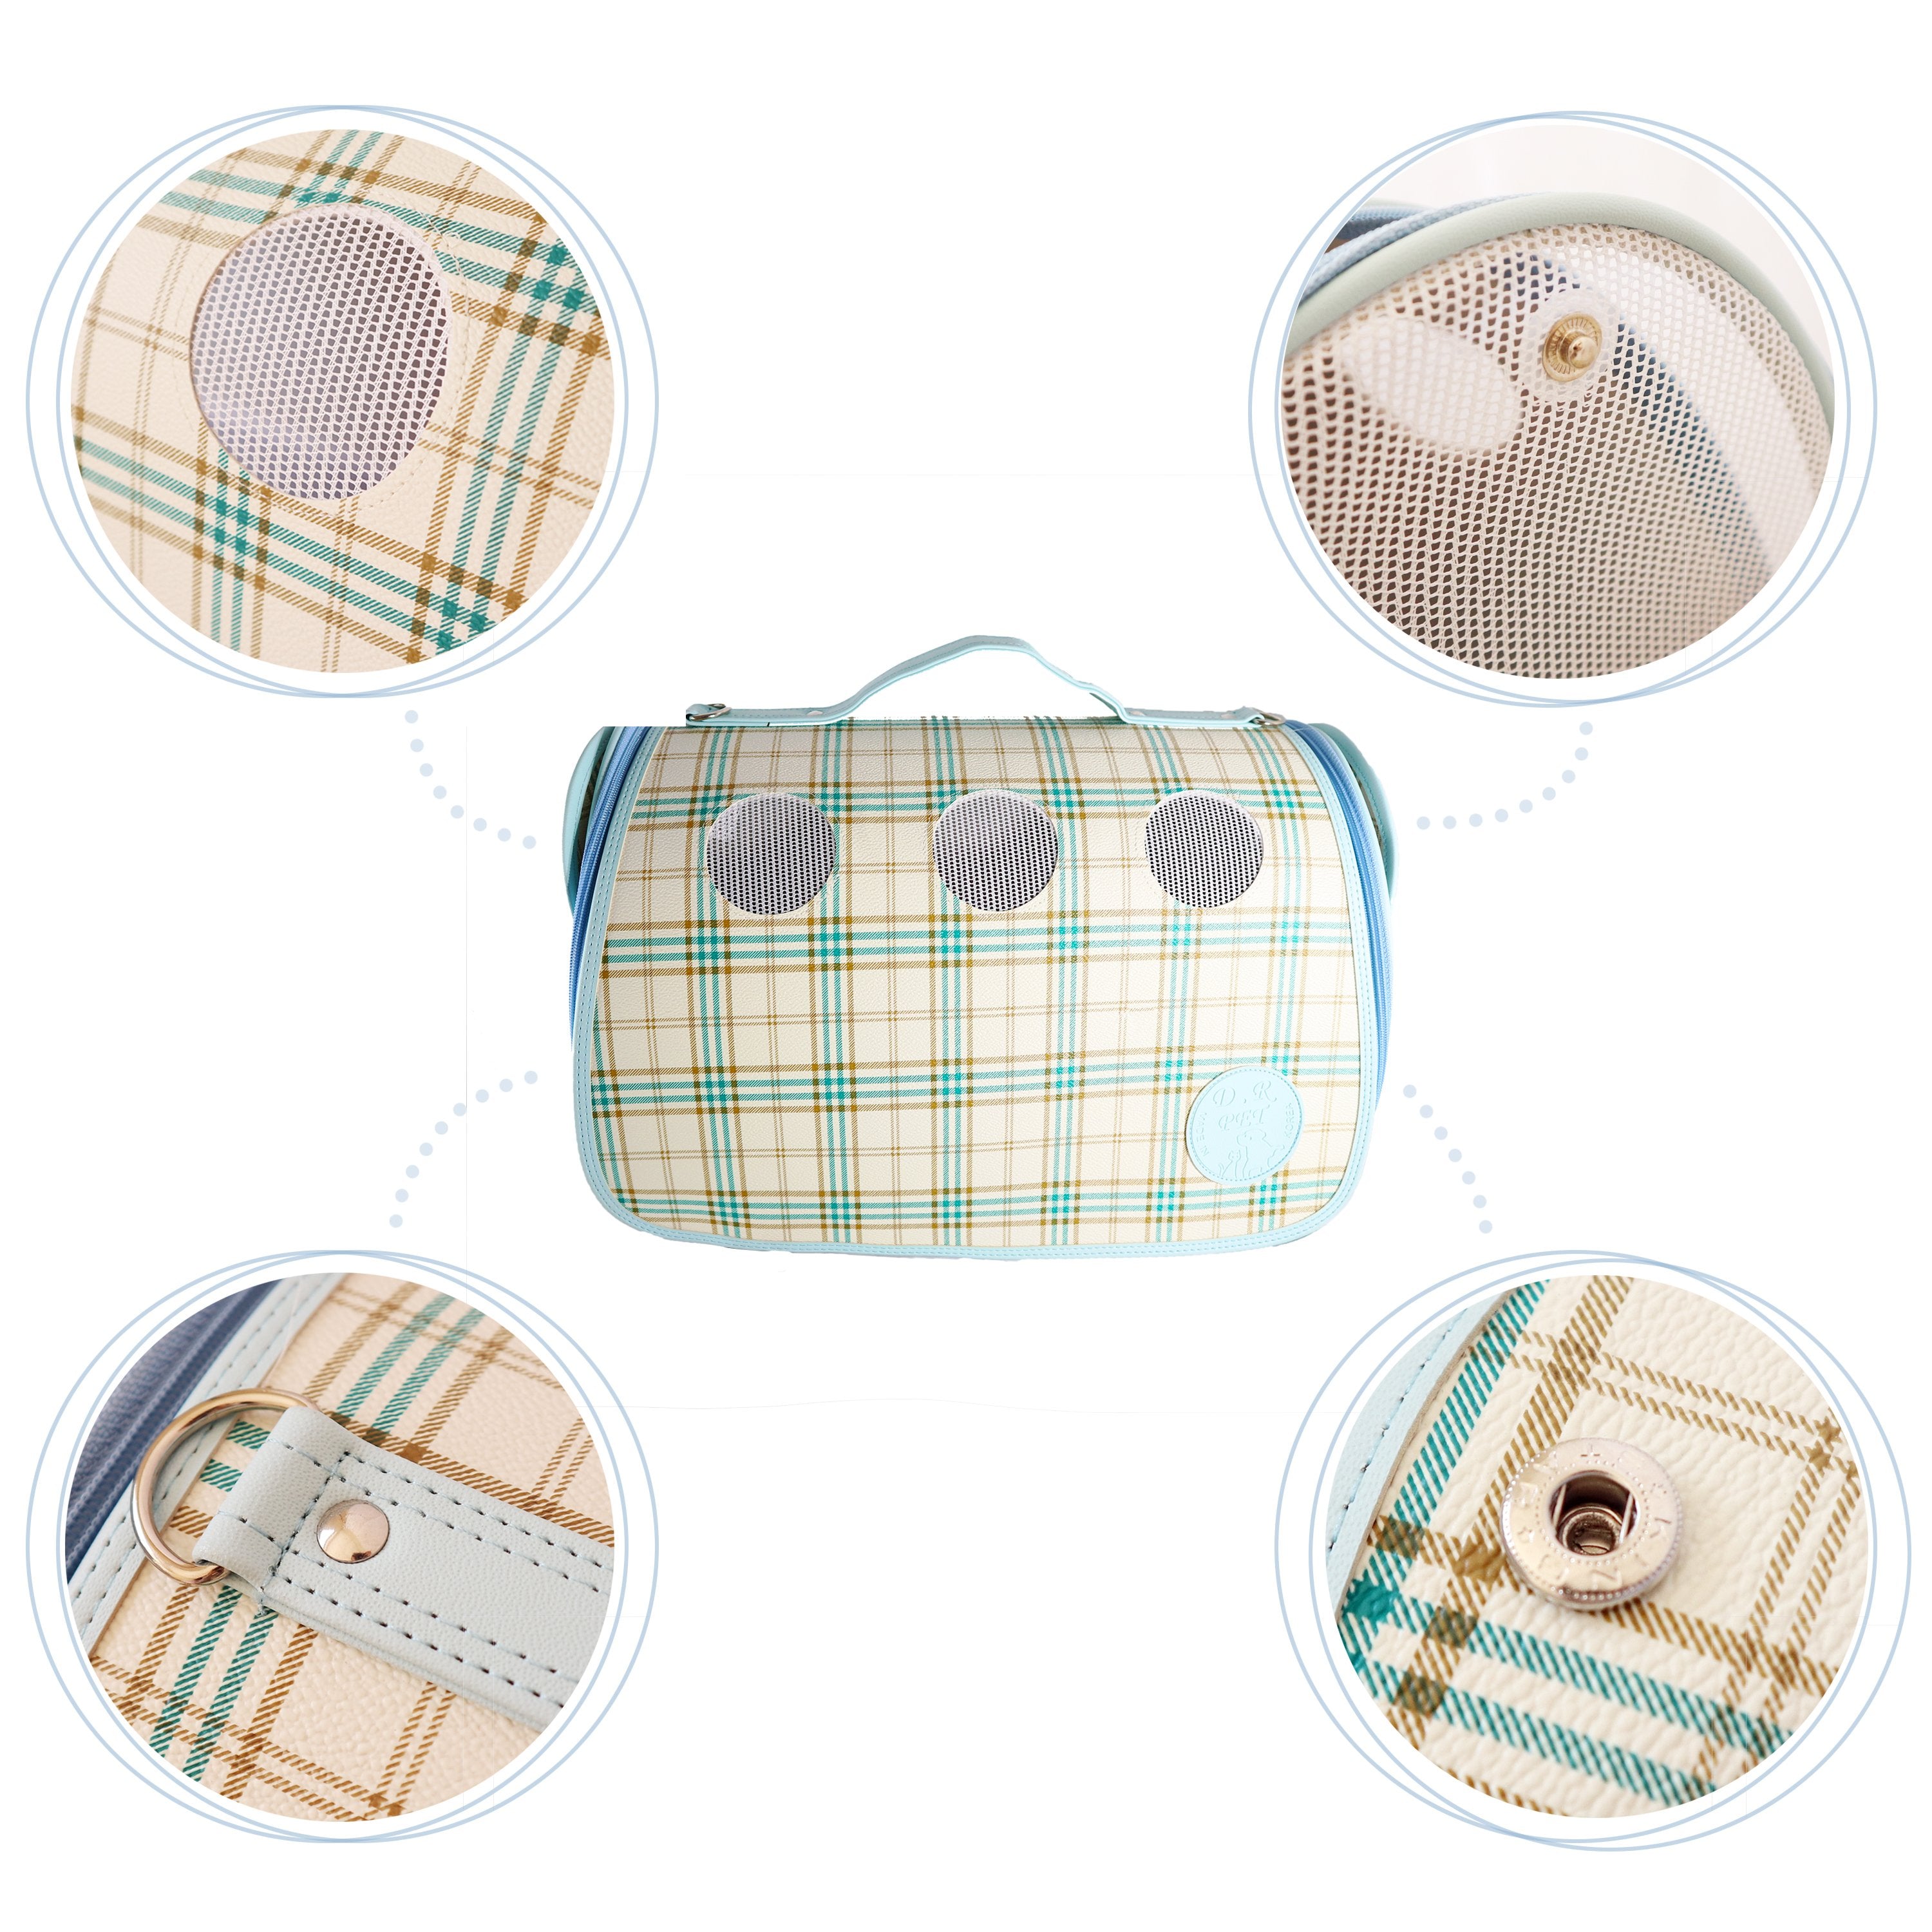 Luxurious Baby Blue Plaid Small Carrier for Small Dogs and Cats. Breathable mesh circles & side panels for protective visibility. Leather Case with top handle and strap with padding. detailed Image of included Close Up Features of Carrier